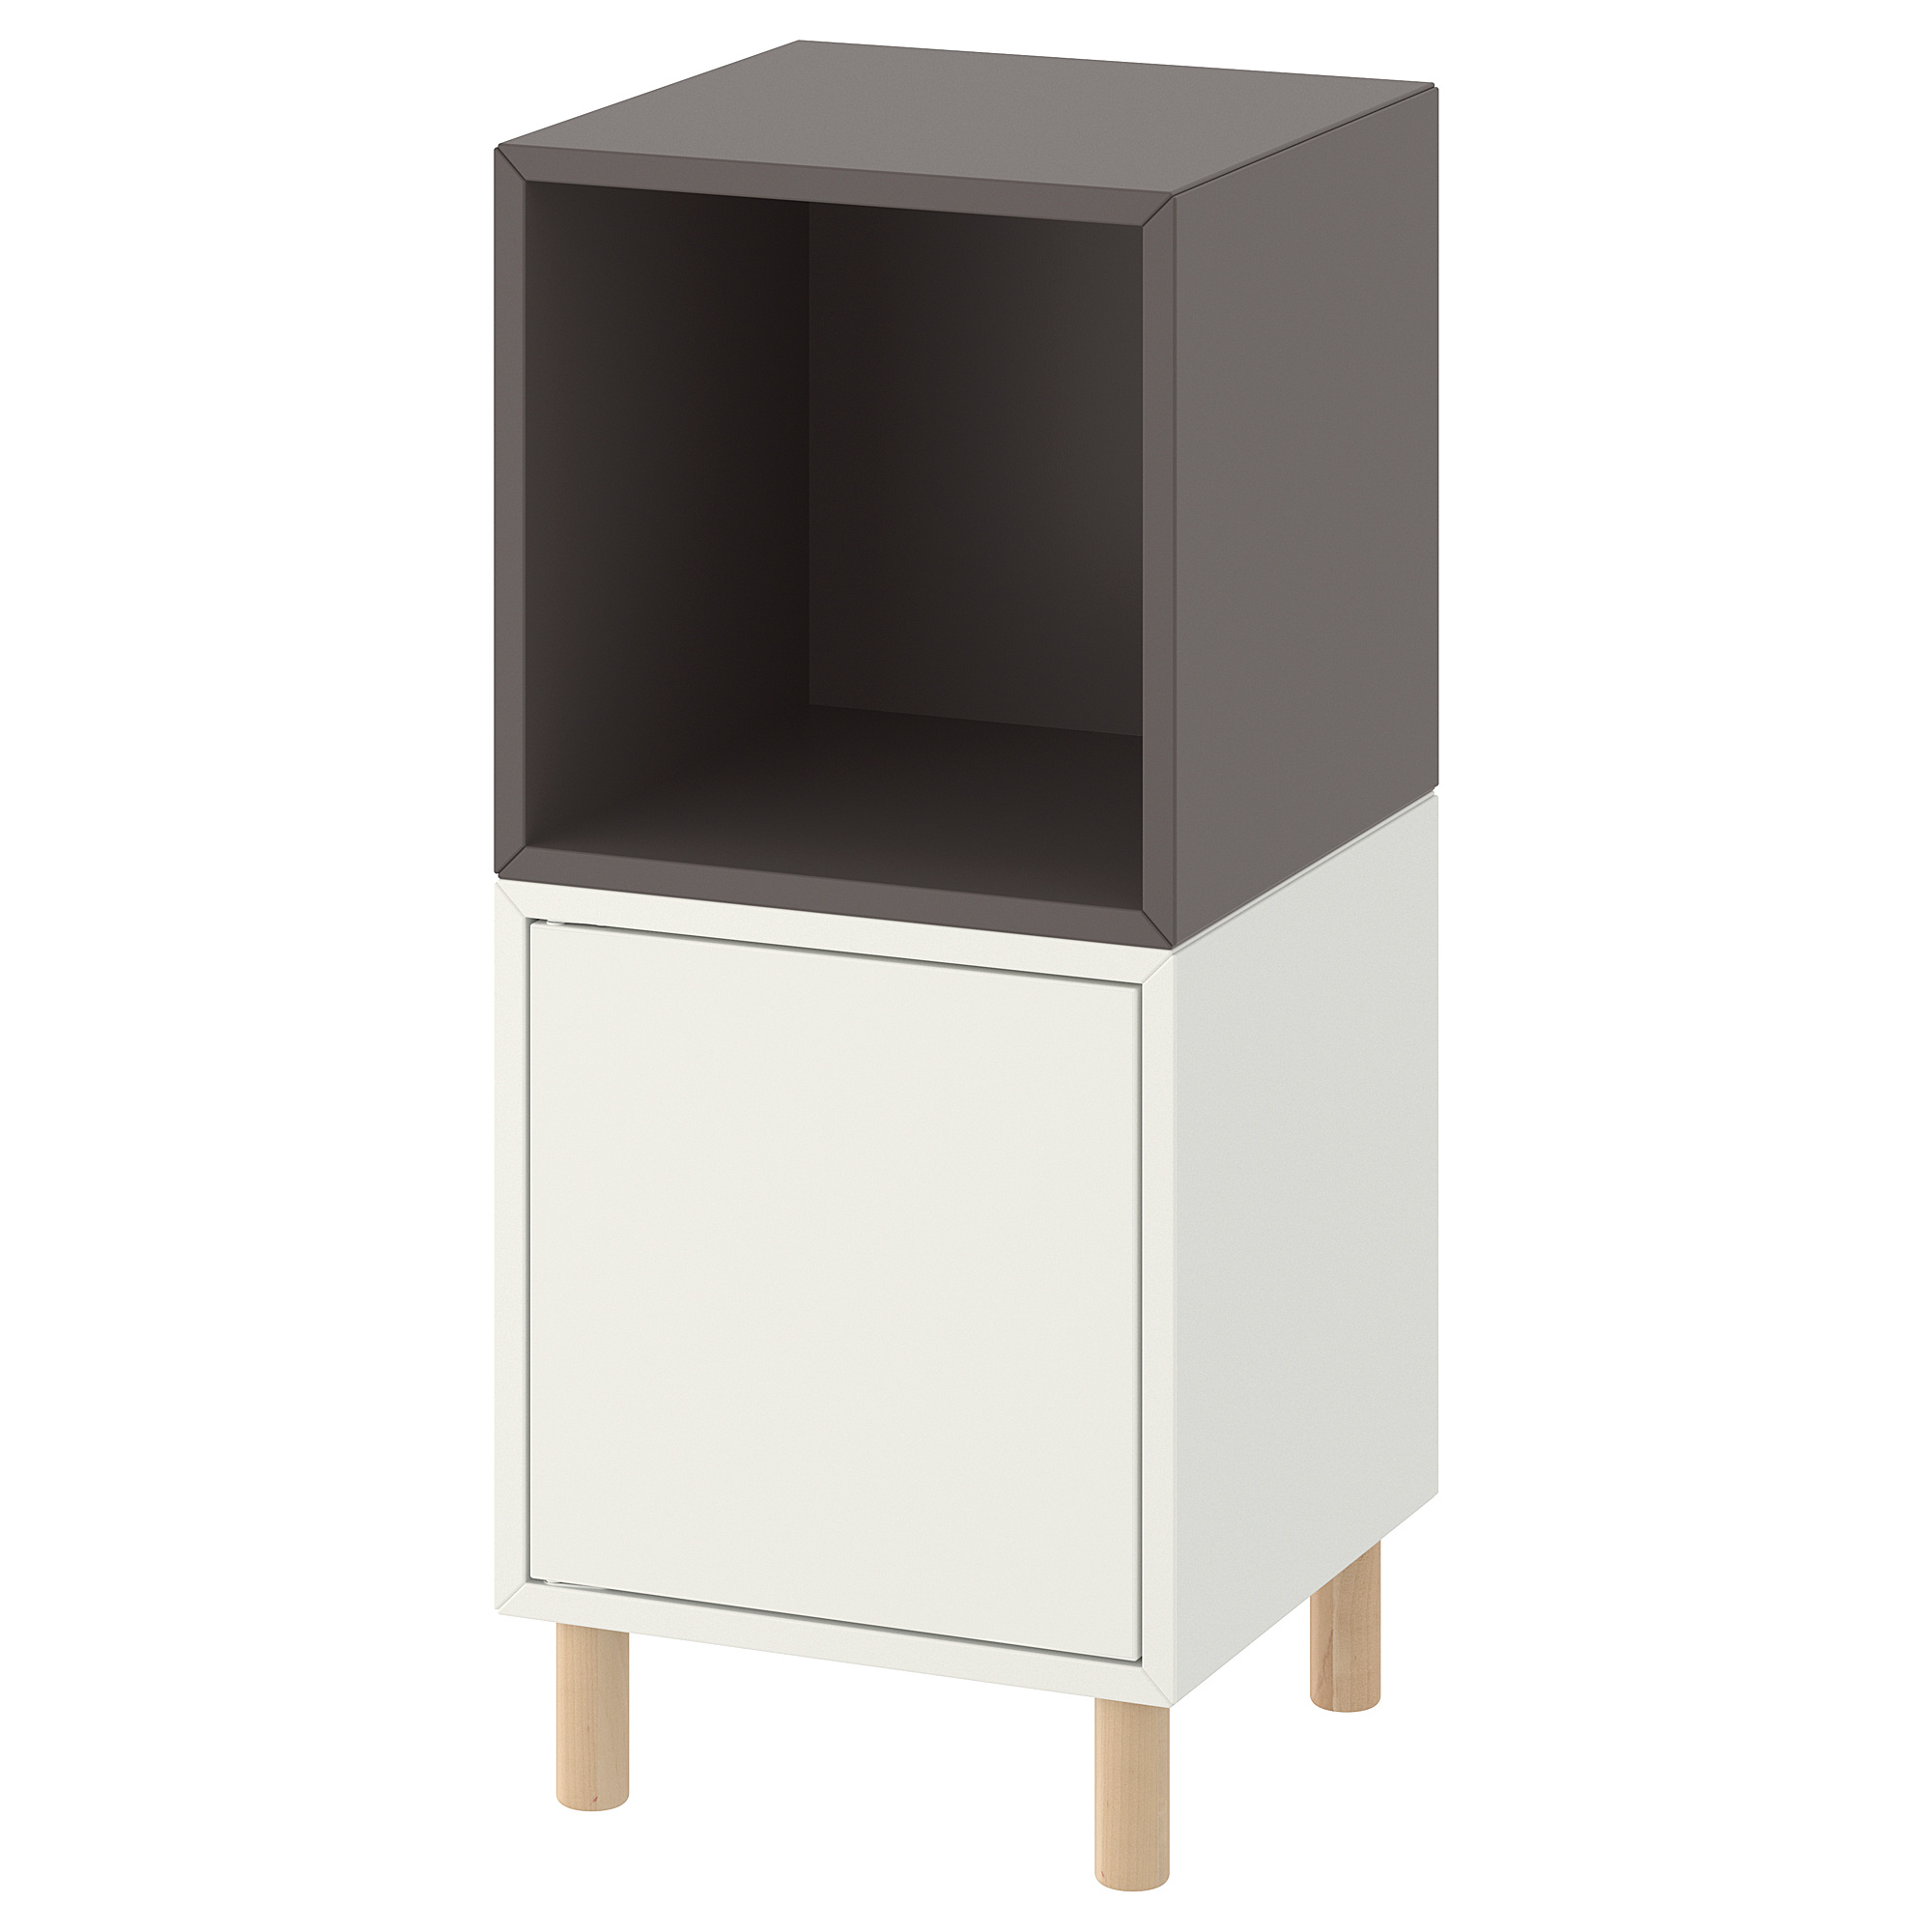 EKET cabinet combination with legs